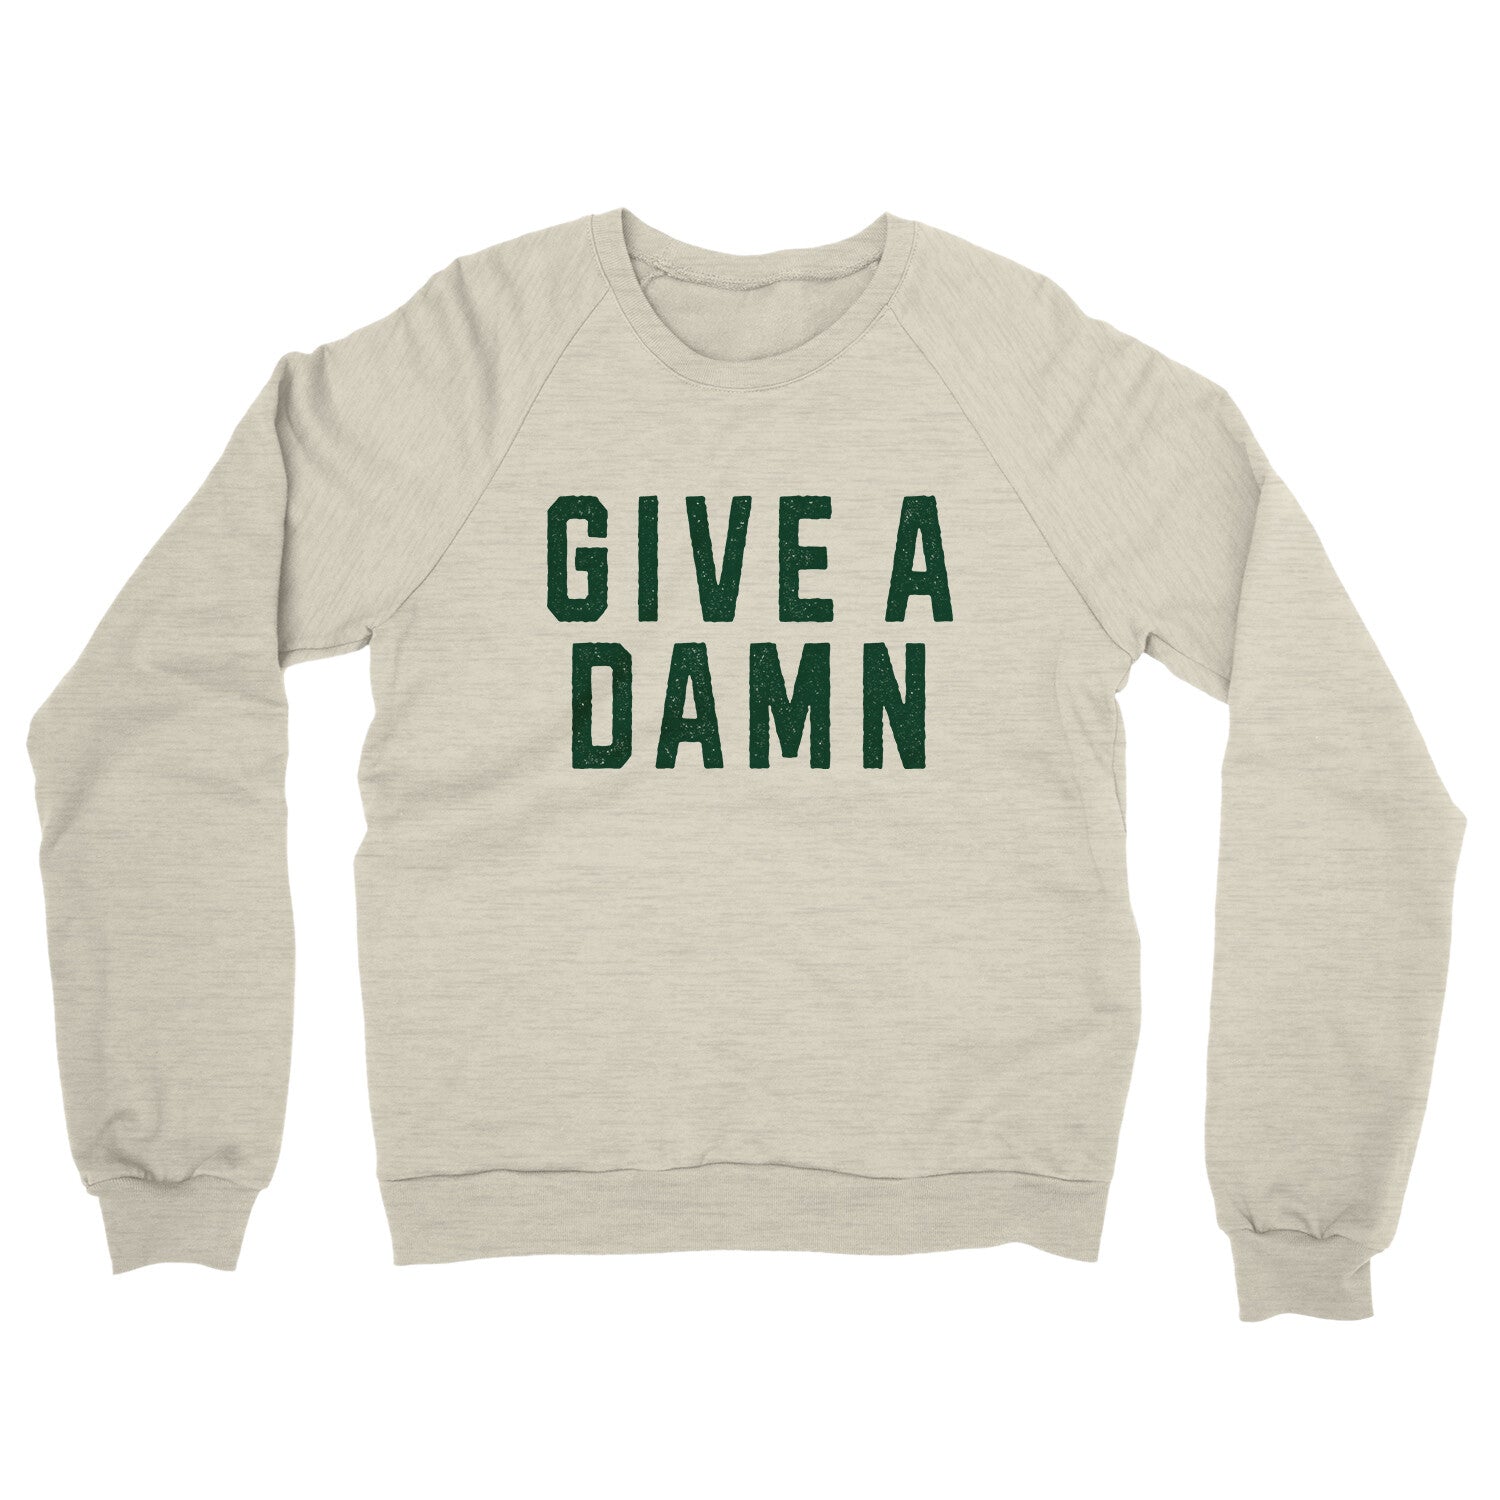 Give a Damn in Heather Oatmeal Color